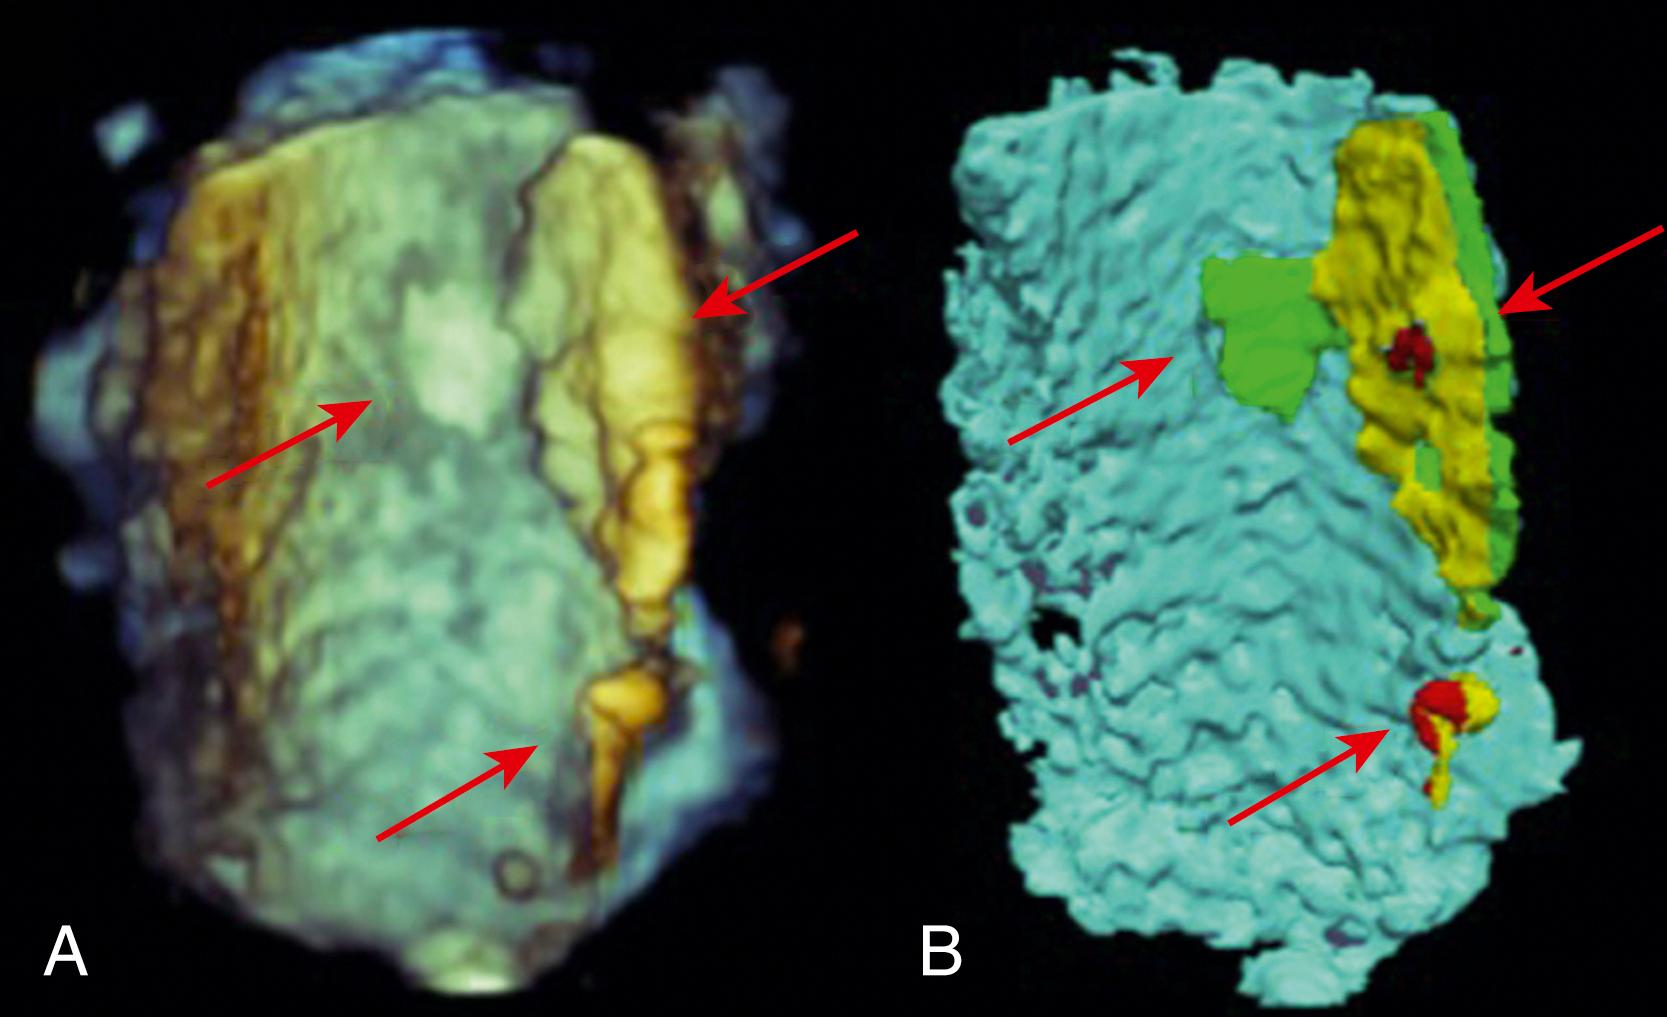 Figure 130.2, A, Three-dimensional transesophageal echocardiographic image of a diseased aorta. B, Processed image of the diseased aorta using an automated analysis software to analyze the characteristics of the plaque. Red arrows indicate atherosclerotic plaques